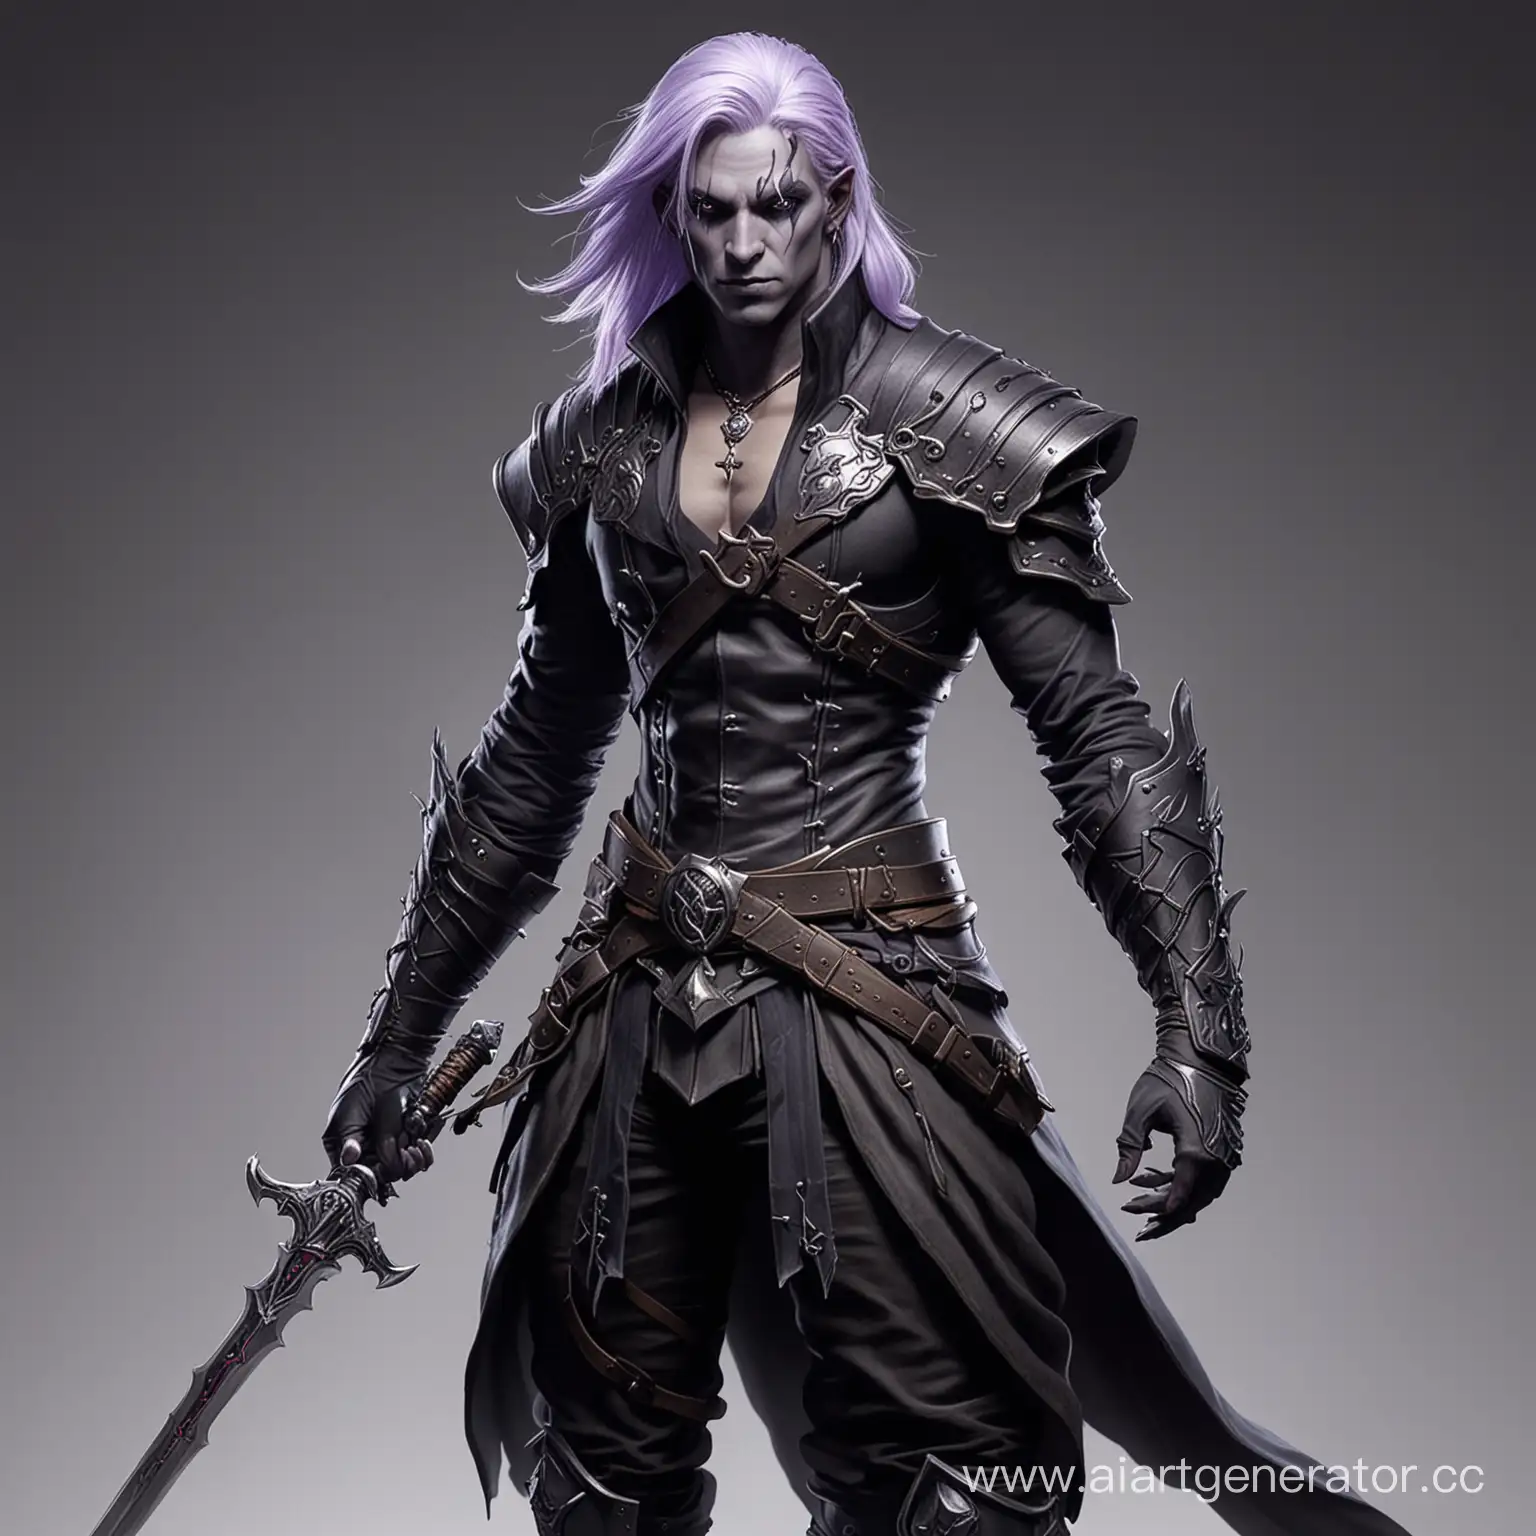 Drow-Warrior-with-Onyx-Skin-and-Lavender-Hair-wielding-Dagger-and-Short-Sword